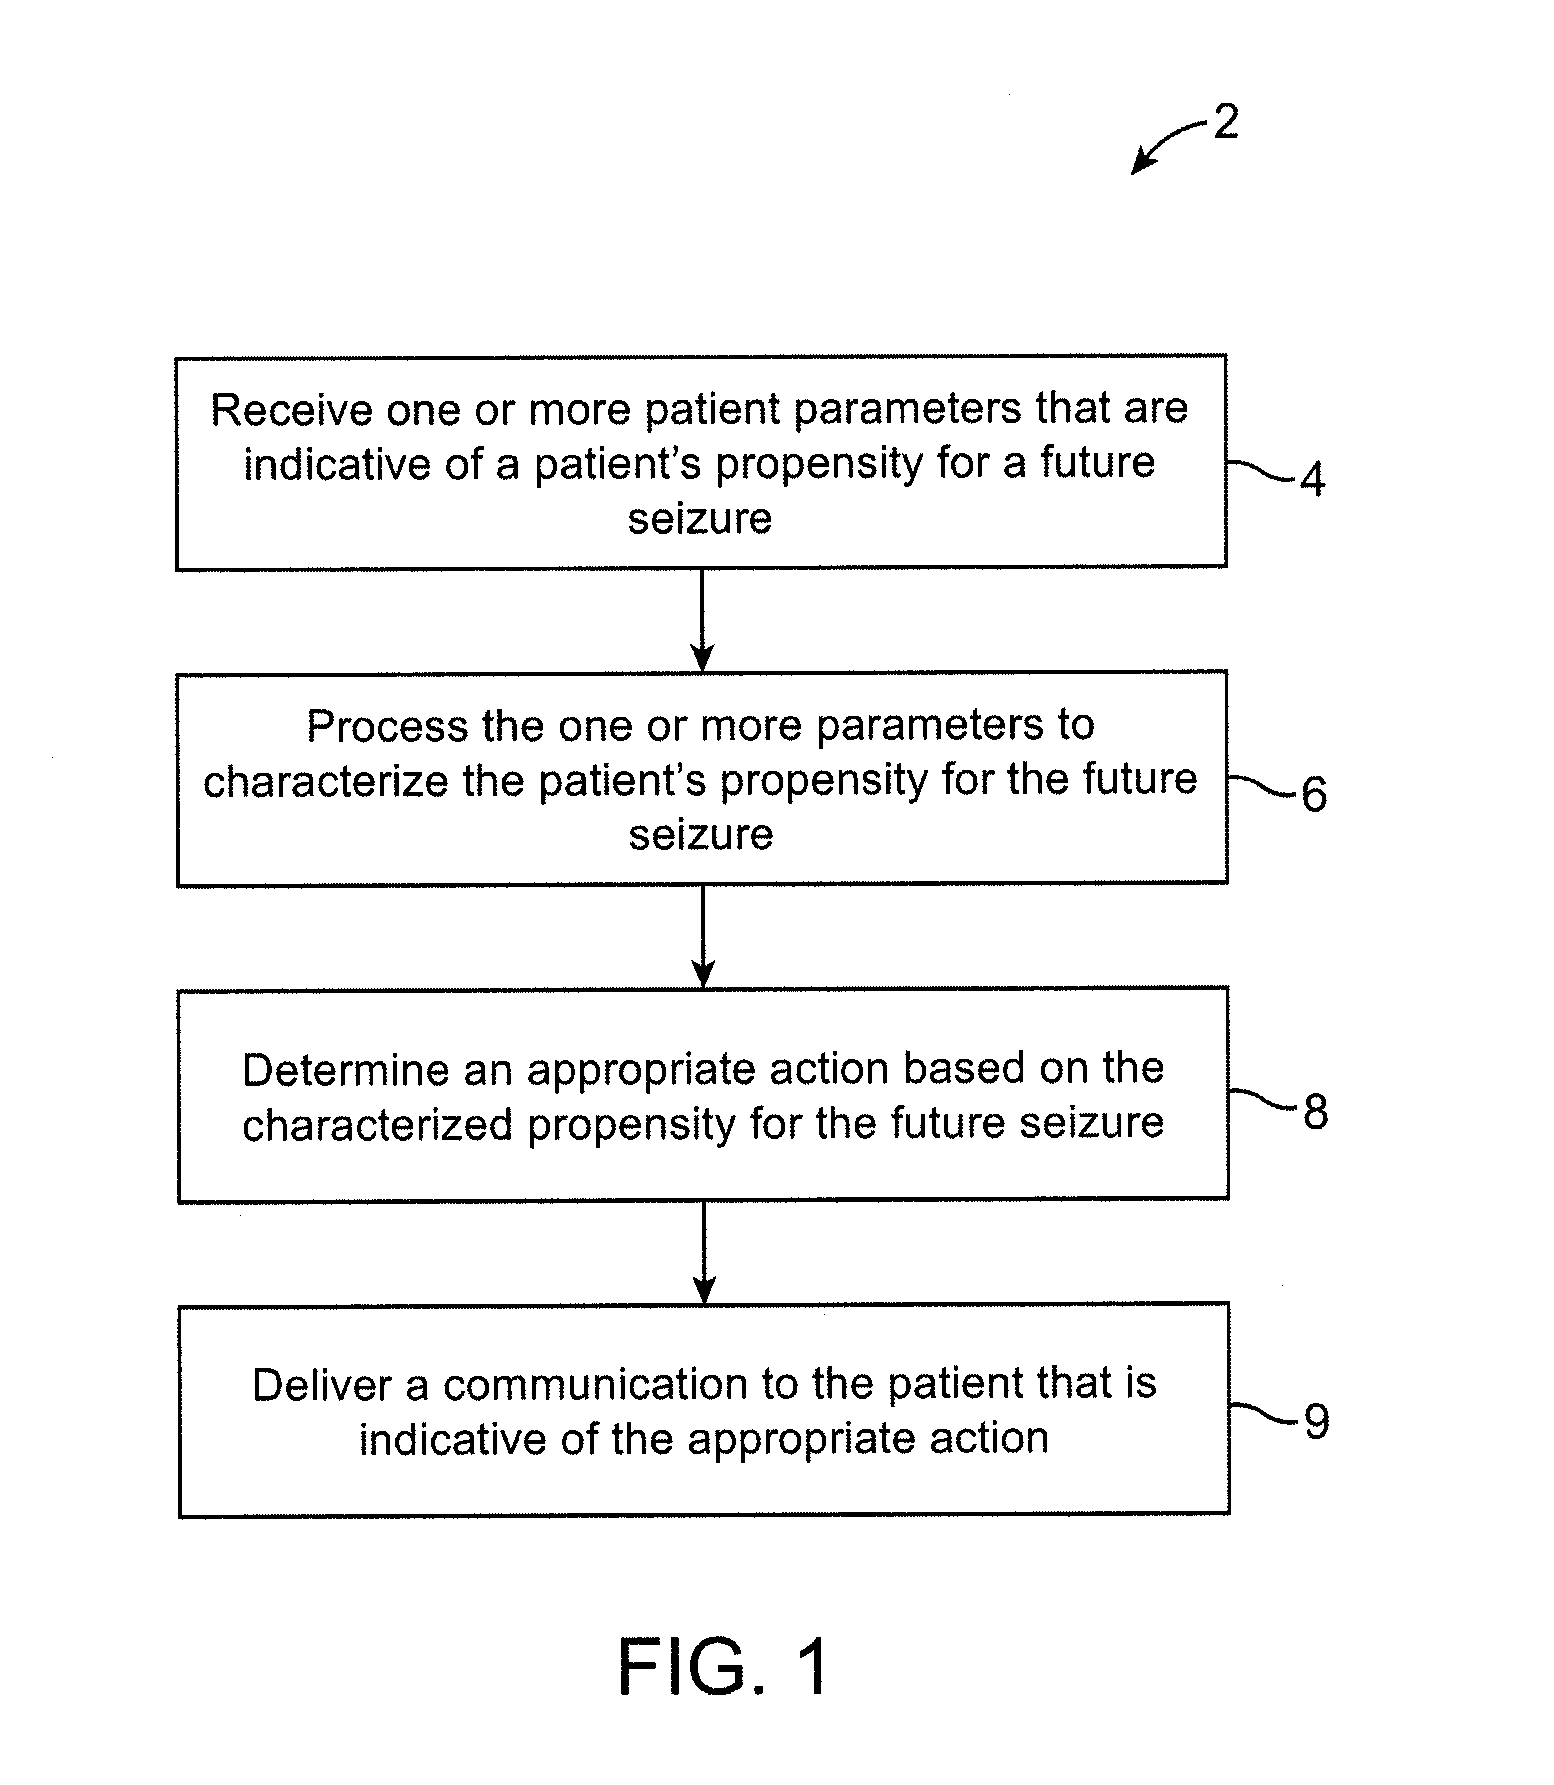 Methods and systems for administering an appropriate pharmacological treatment to a patient for managing epilepsy and other neurological disorders